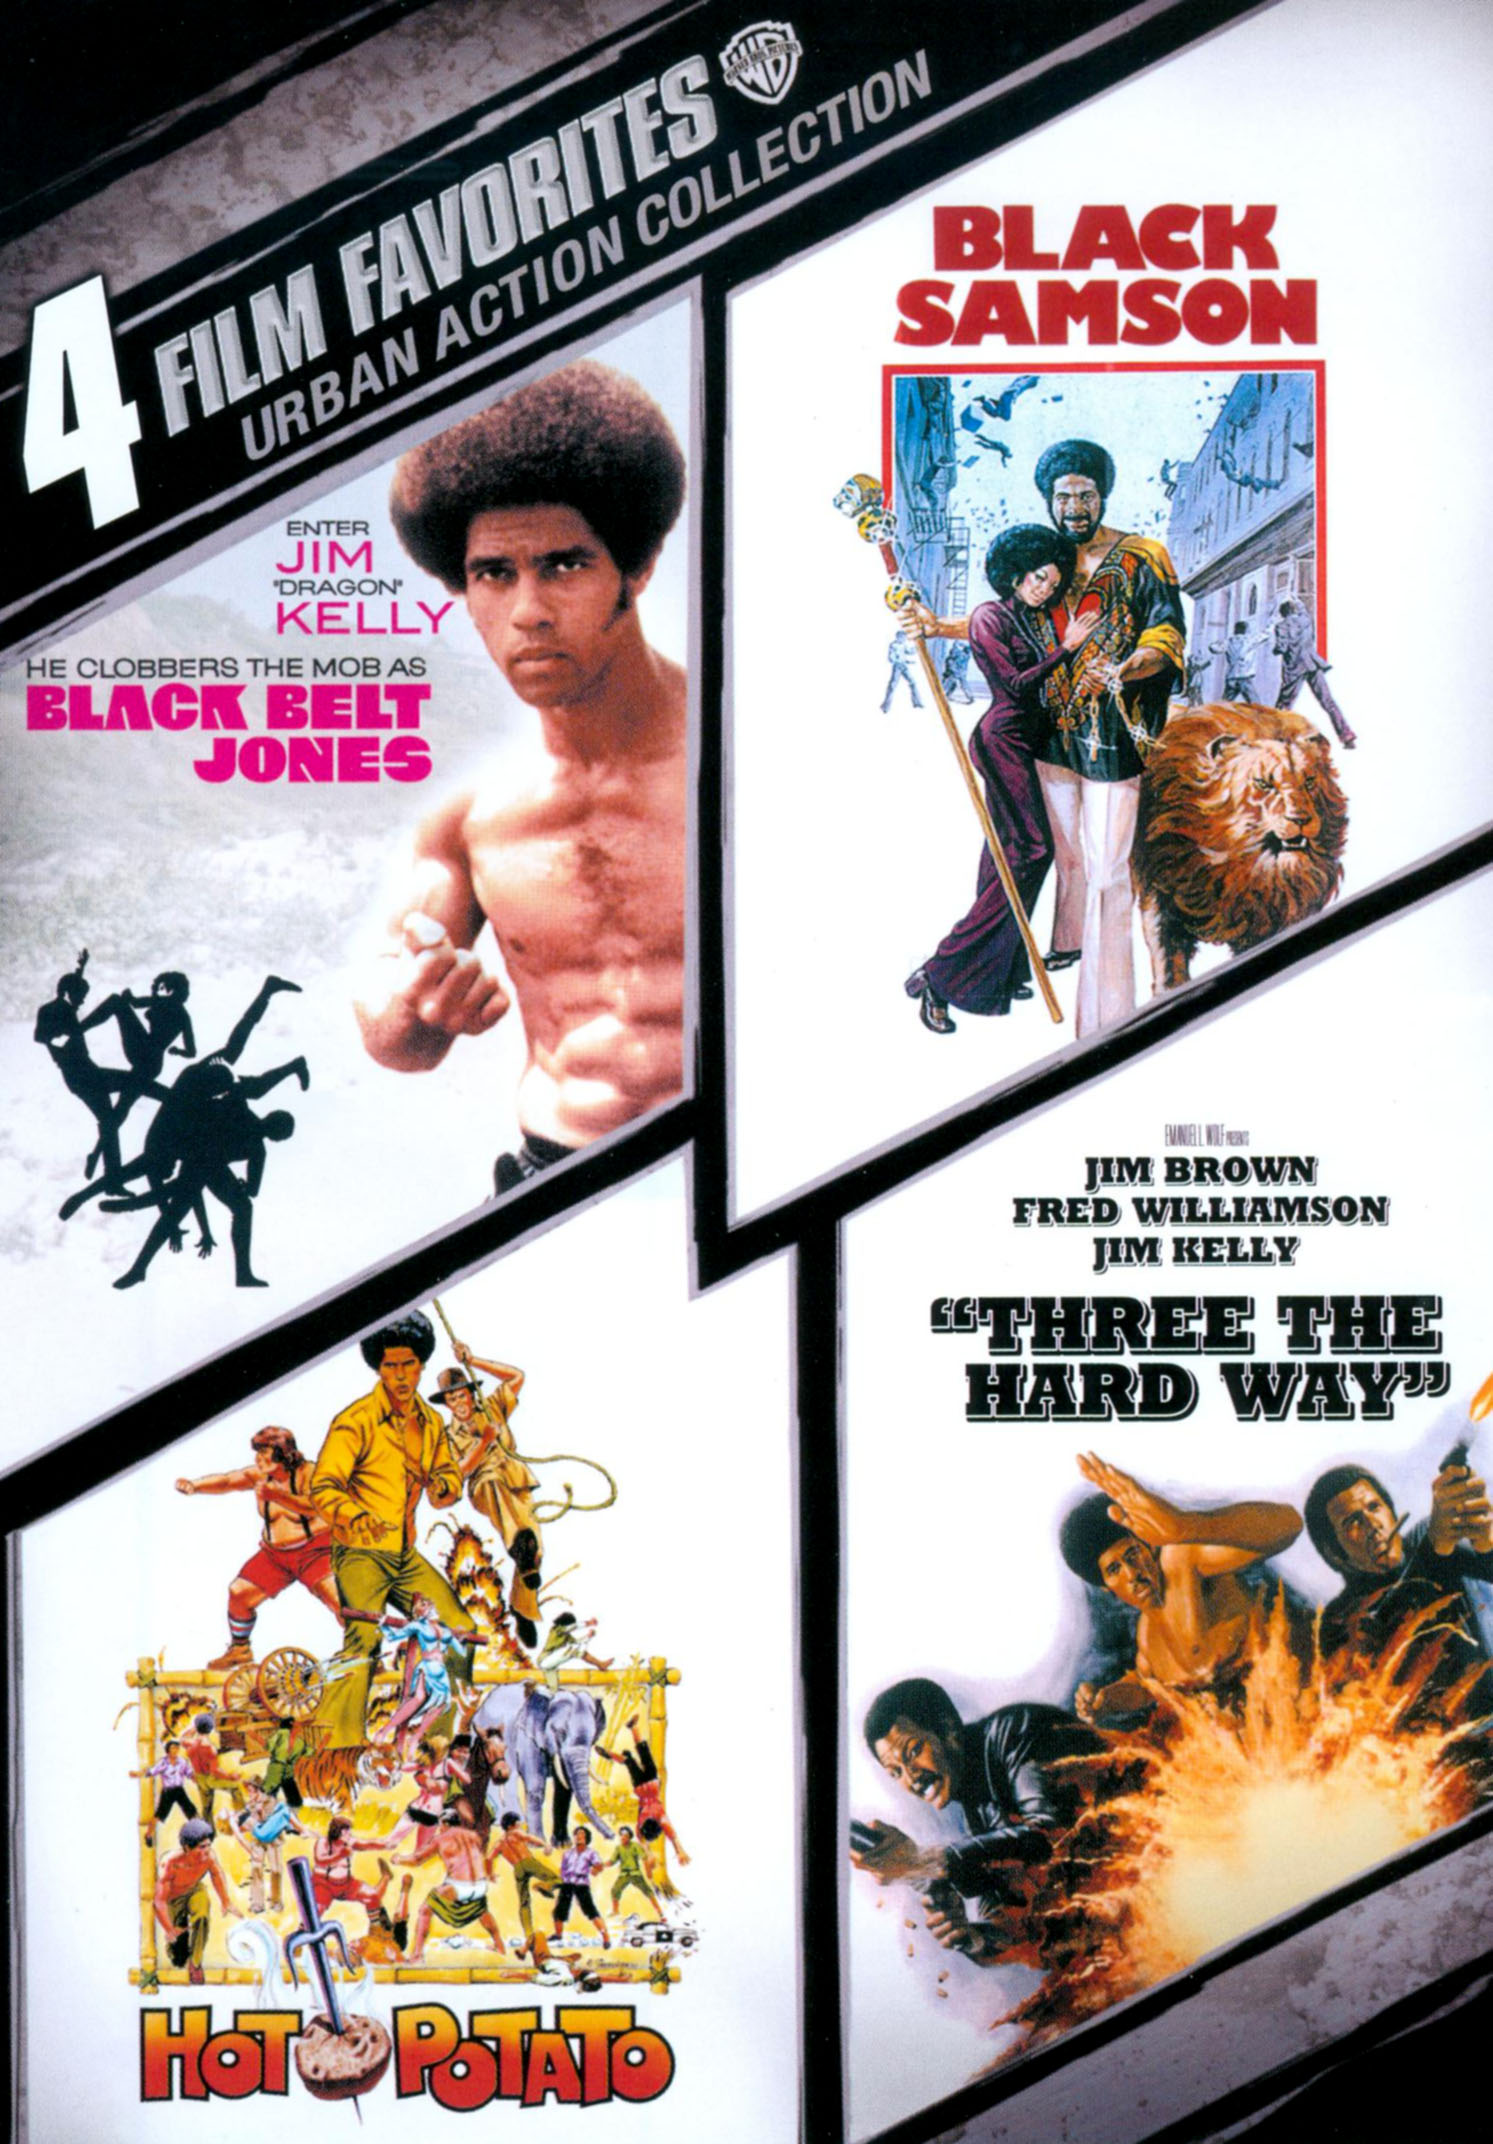 Urban Action Collection: 4 Film Favorites [2 -